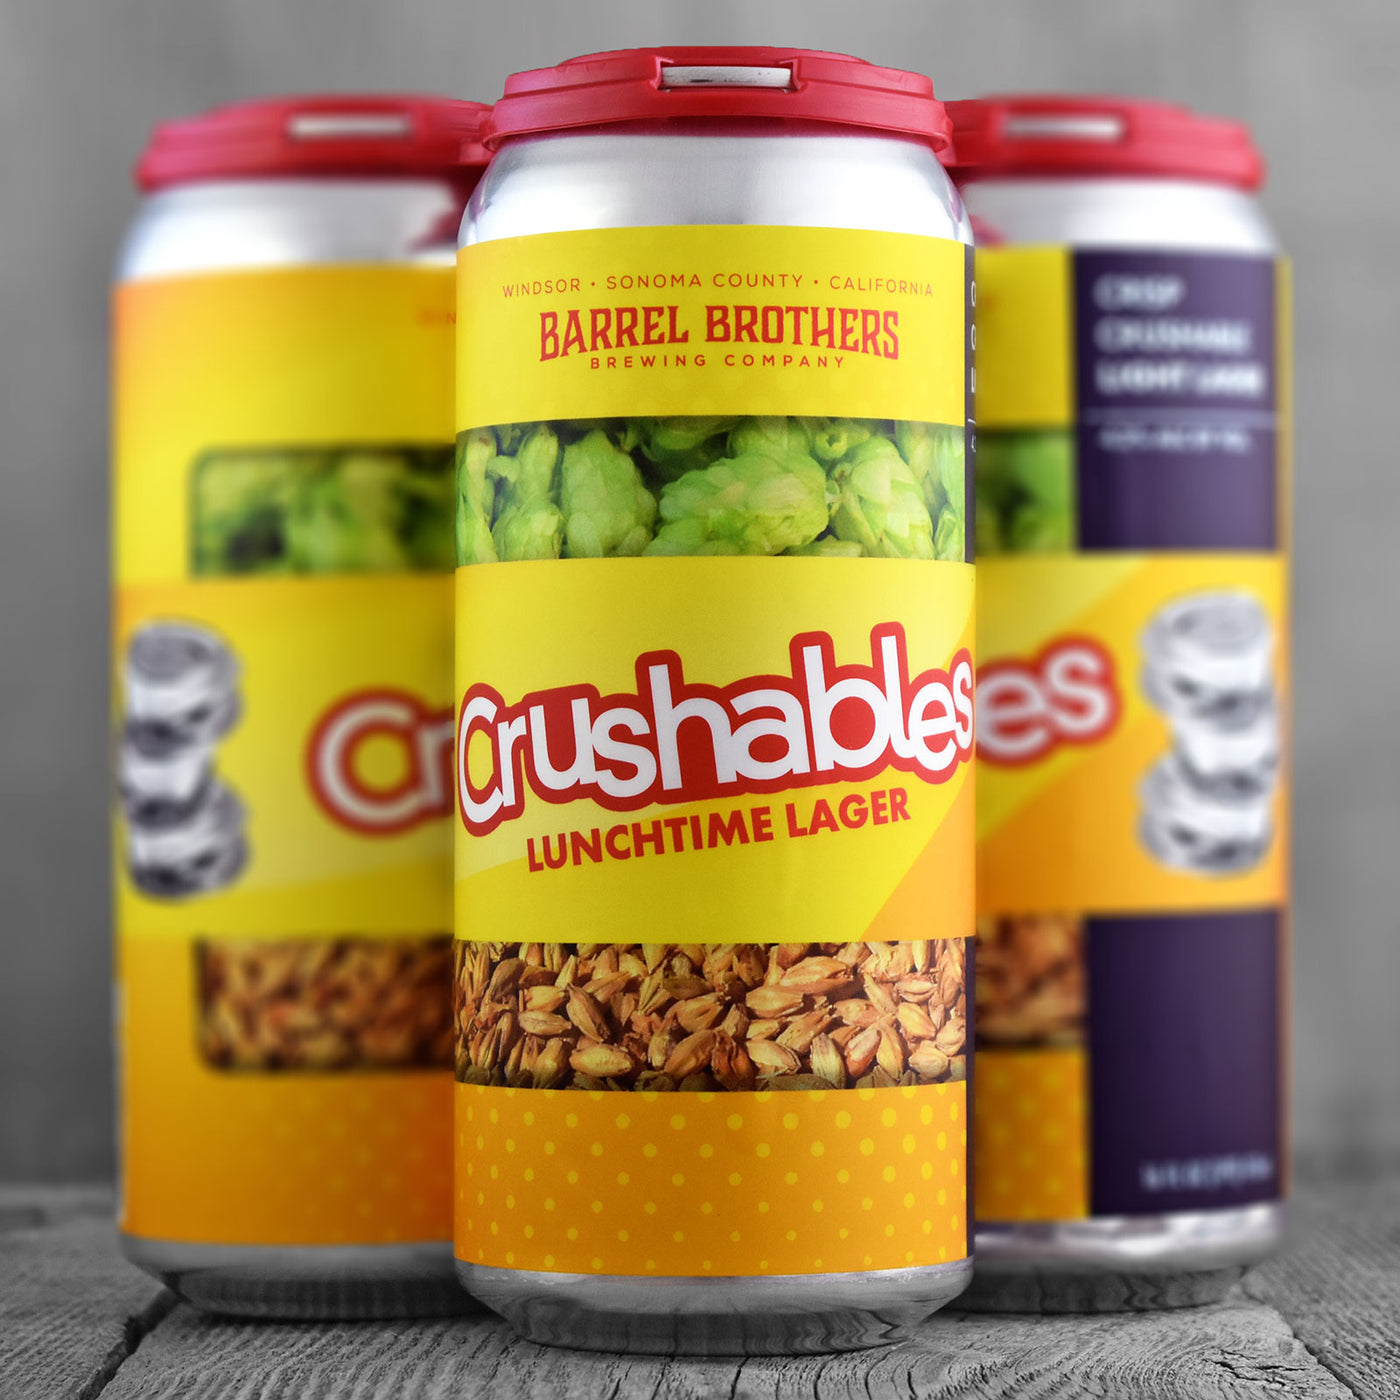 Barrel Brothers Crushables